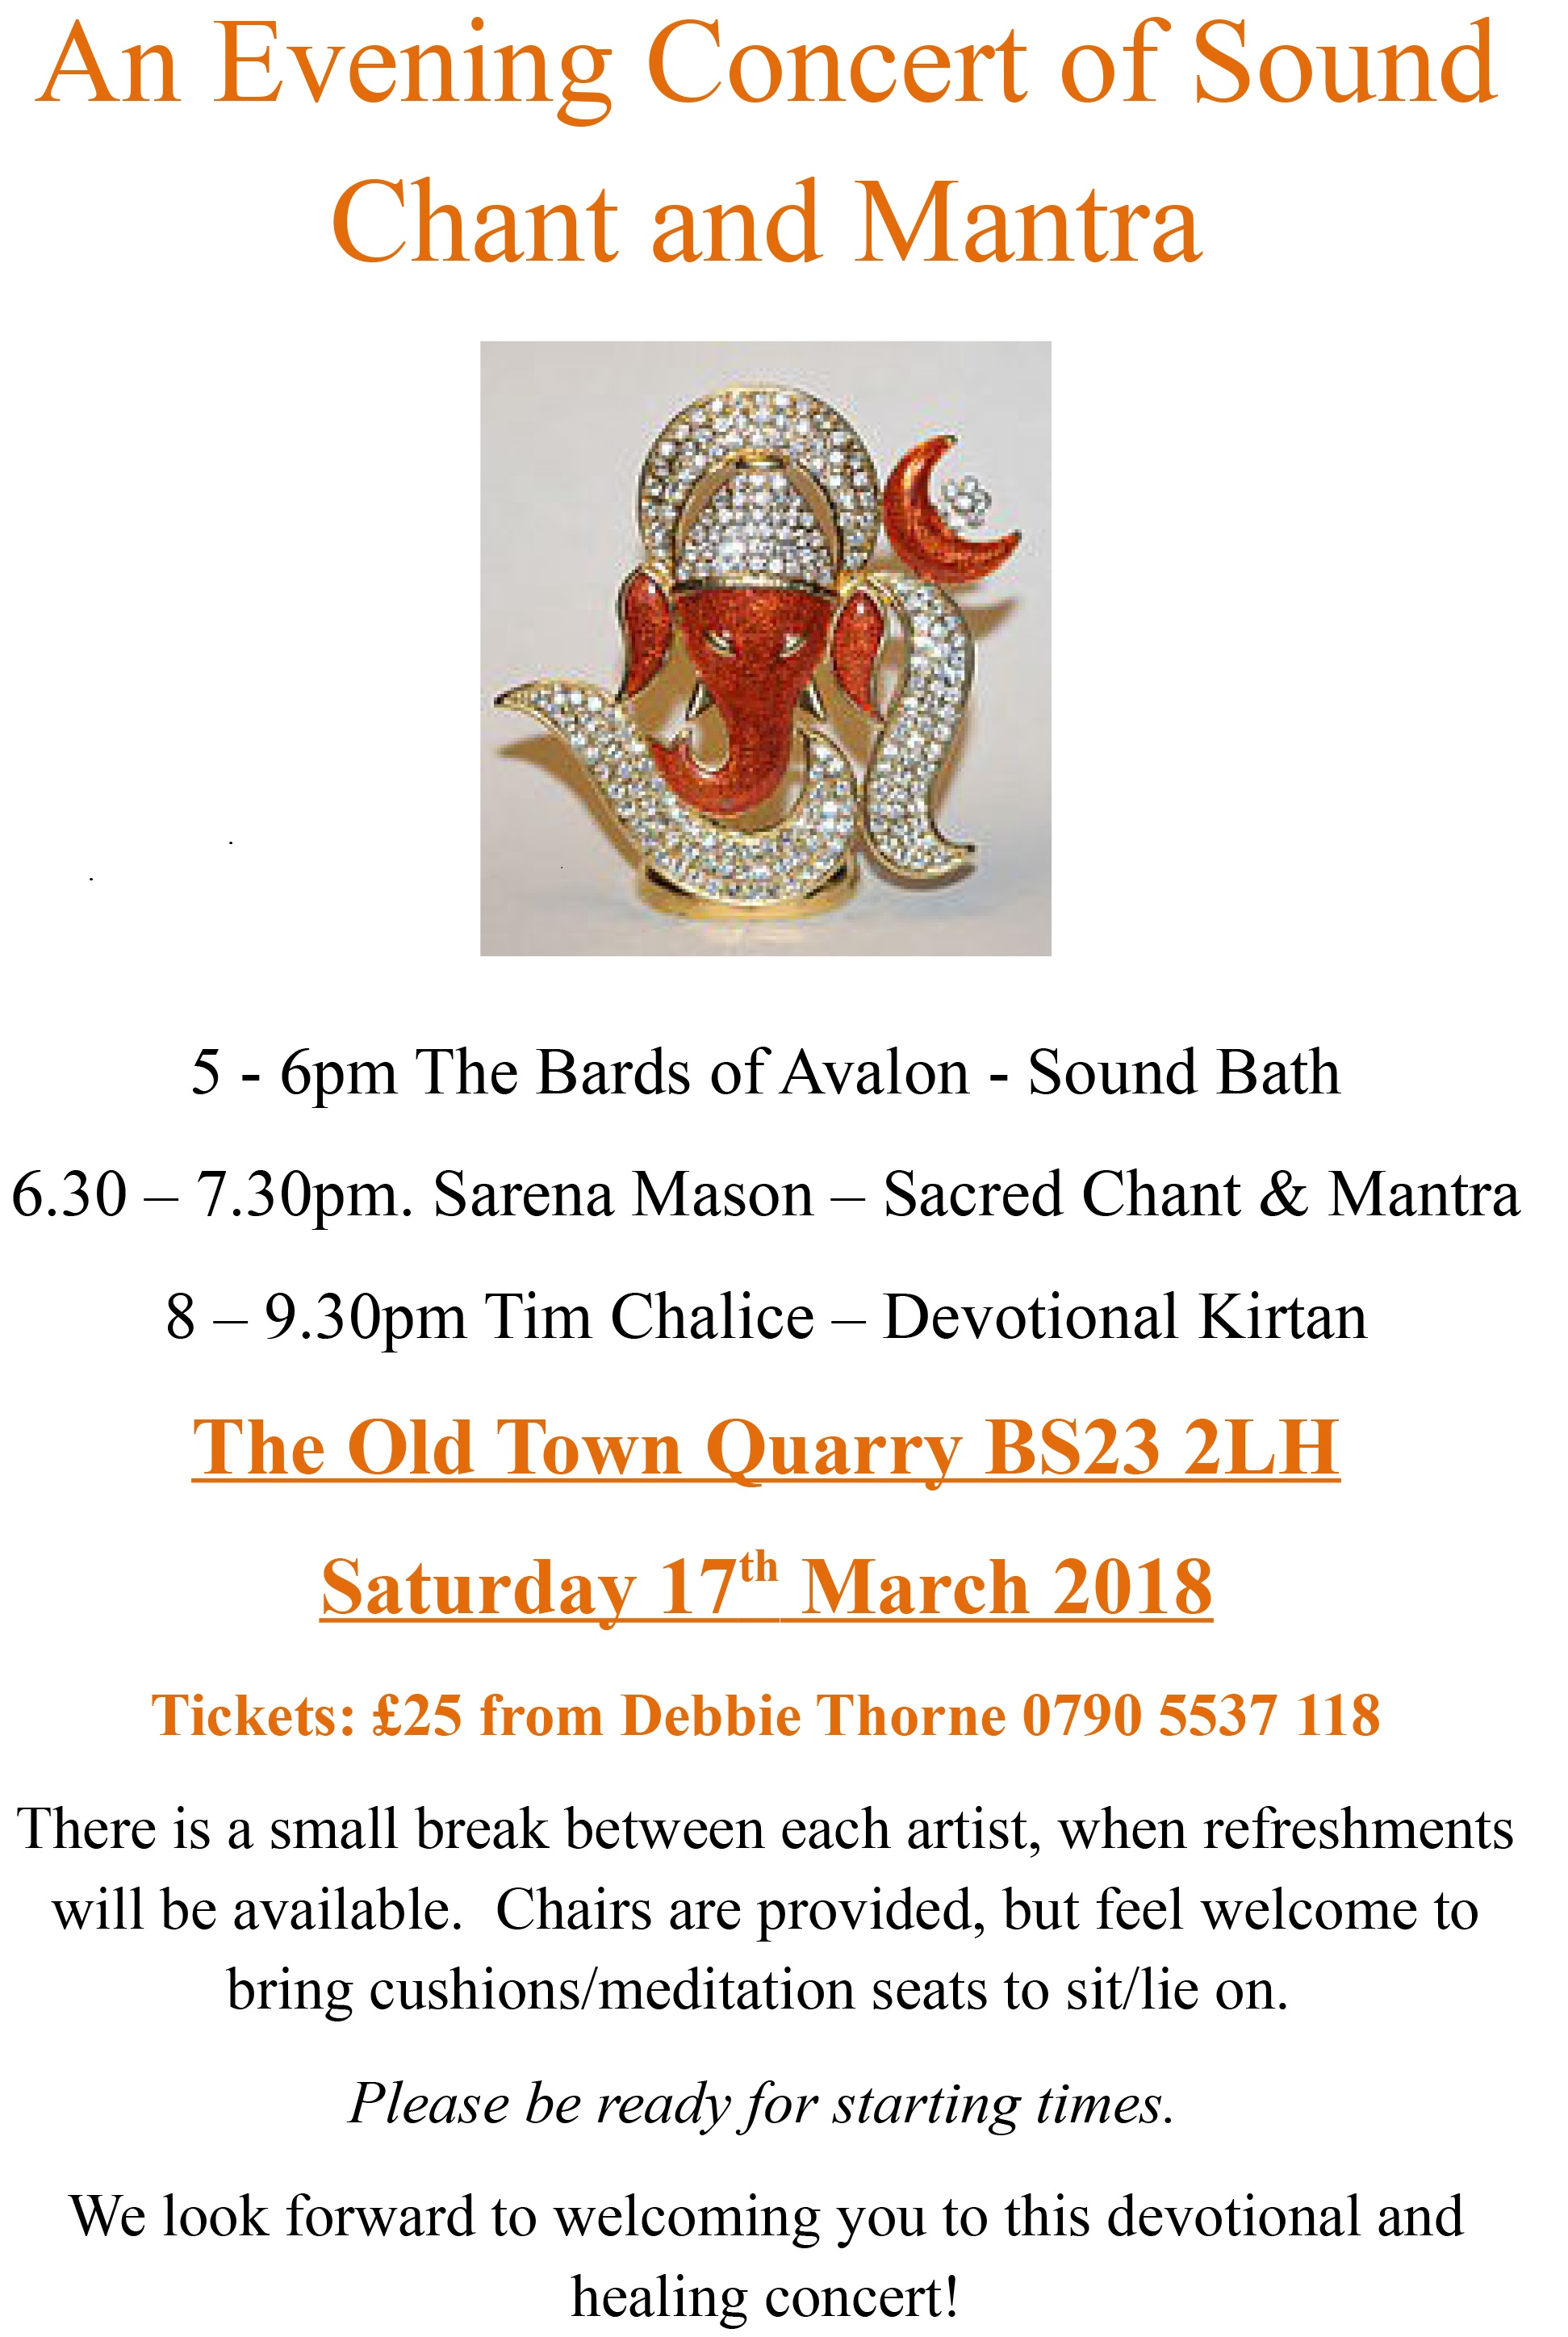 WESTON-SUPER-MARE - An Evening of Sound Chant and Mantra